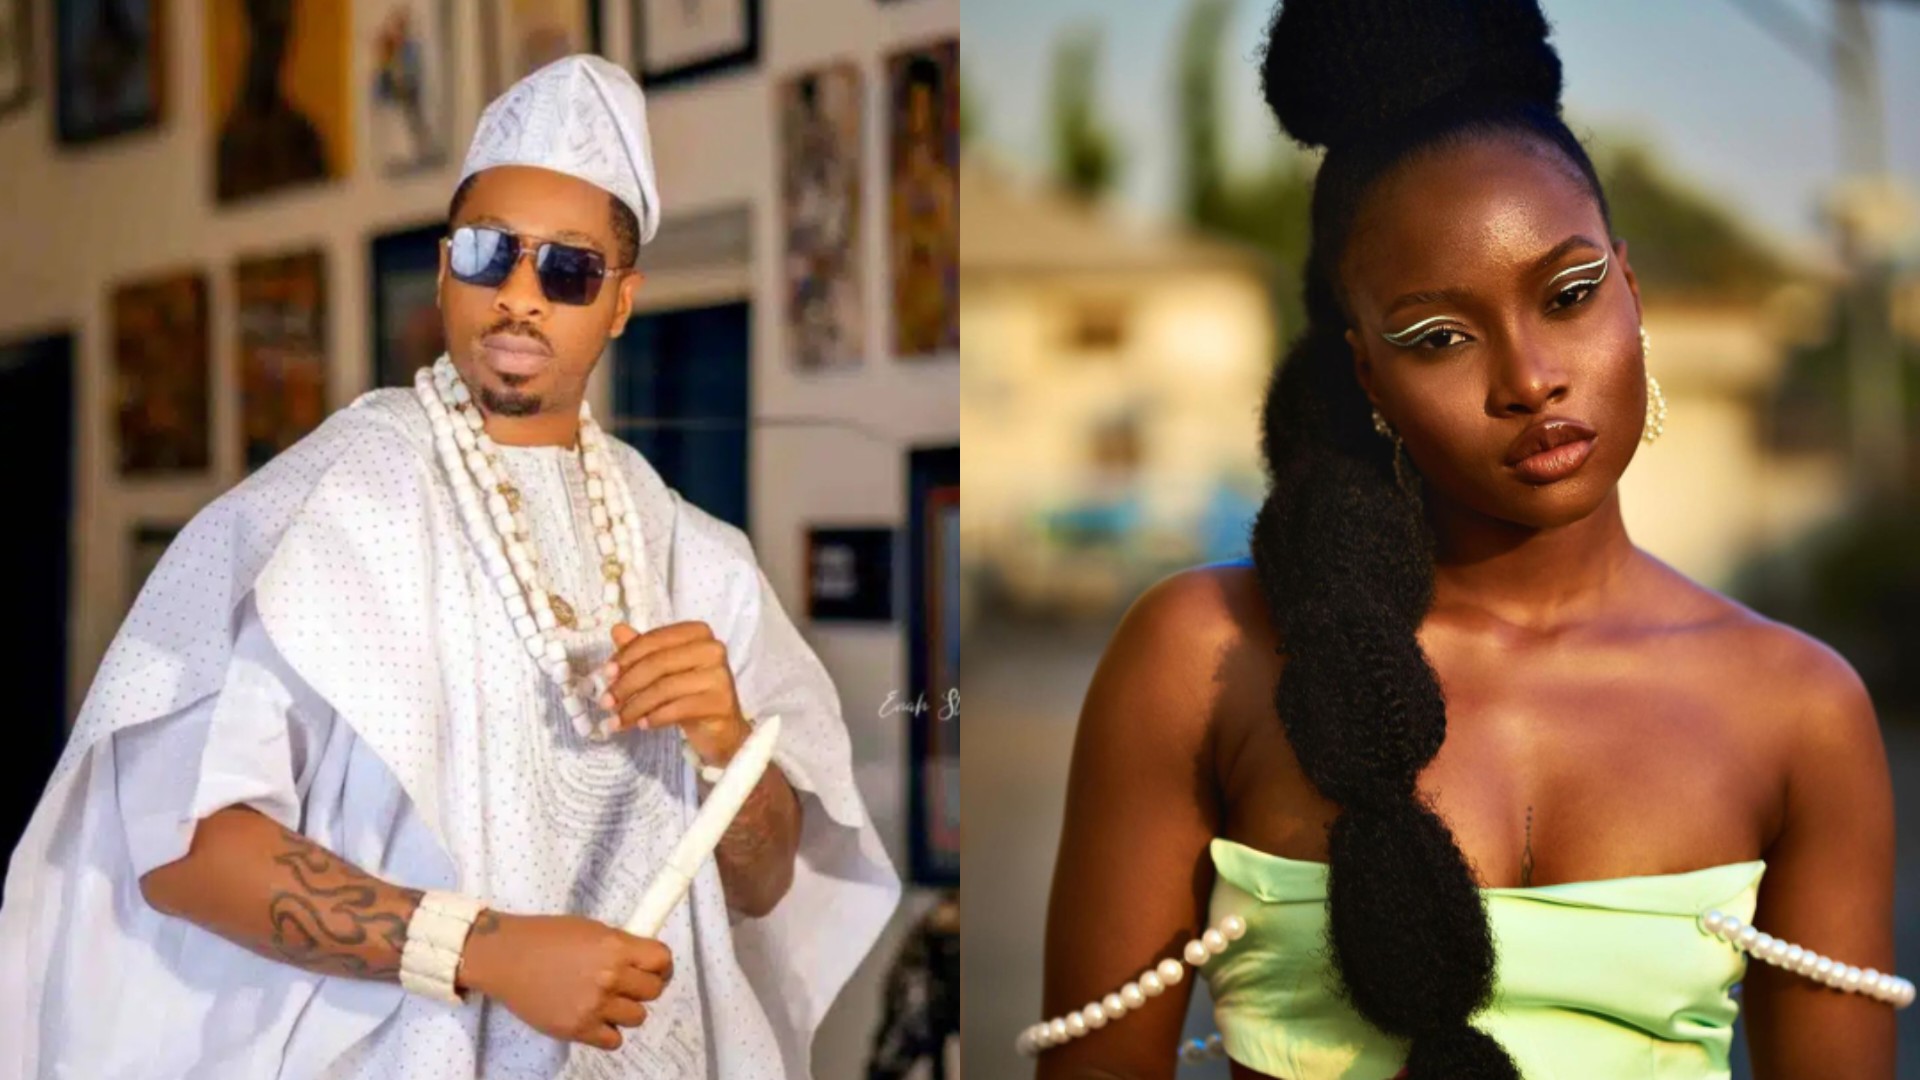 “I’m a 2-time BBNaija Queen Maker” – Ike reacts as Ex girlfriend Mercy Loses to Illebaye [photos]